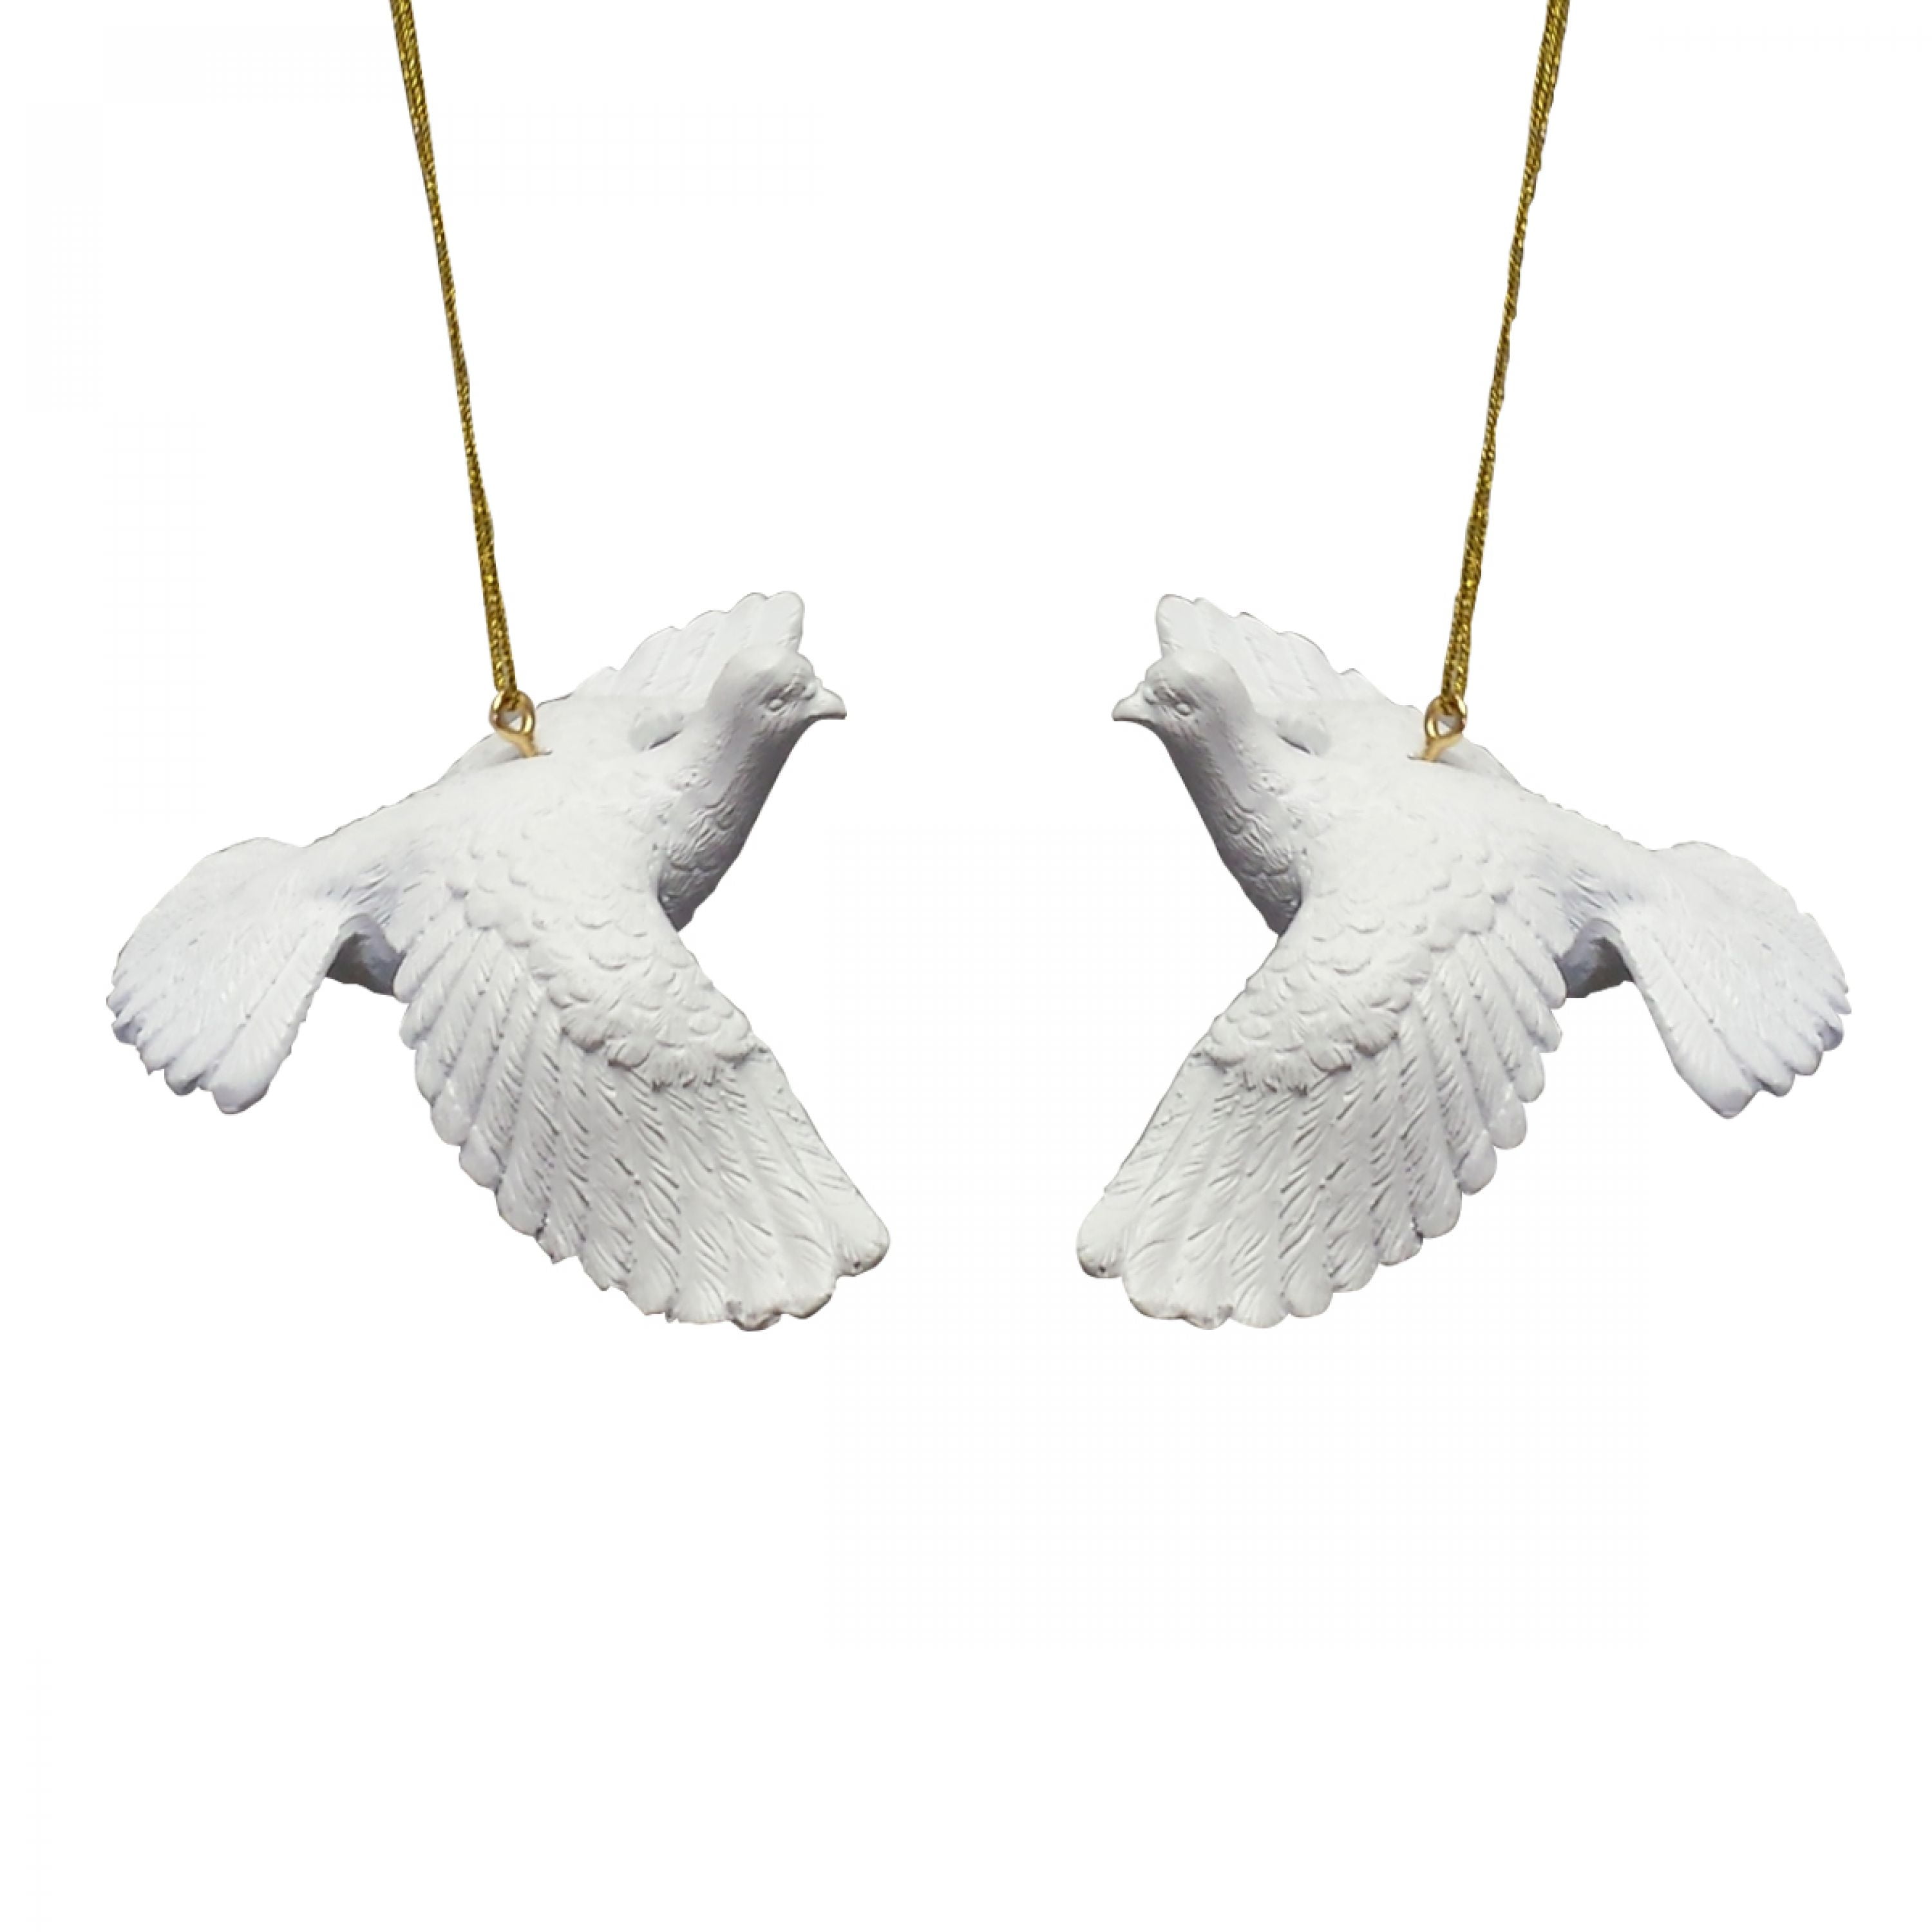 Turtle Dove Ornaments as Seen in 2 Bestselling Gift for Friends 2 Pcs 